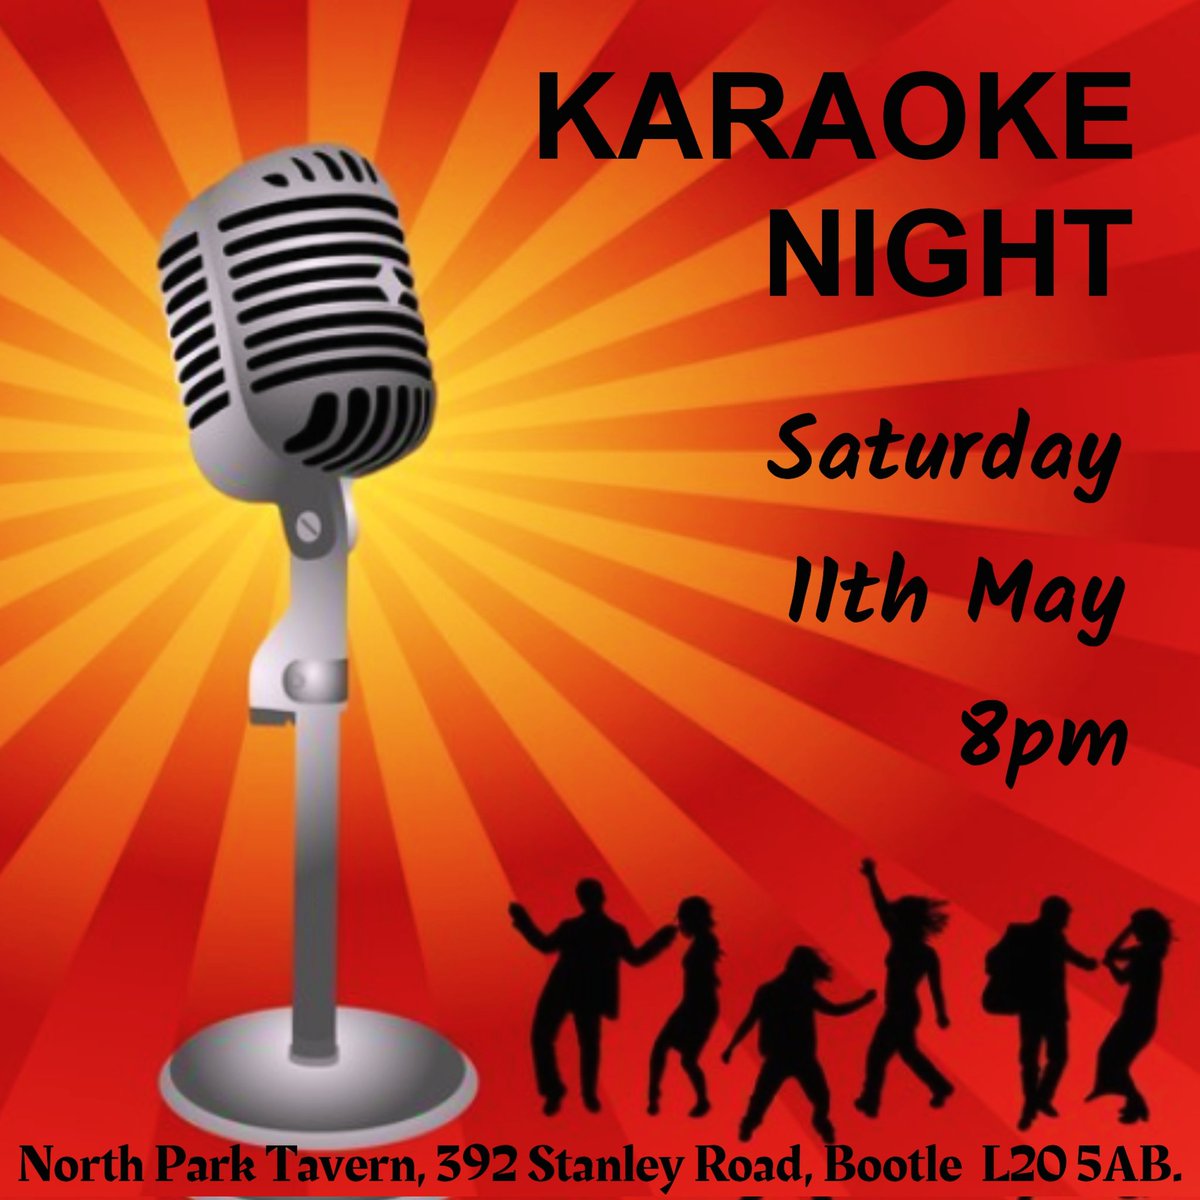 KARAOKE NIGHT 

Pub singers rejoice, our karaoke night is back this Saturday from 8pm.

Join us for good beer and some slightly out of tune singing 😃 

#karaoke #karaokenight #bootle #bootlescene #bootlenightlife